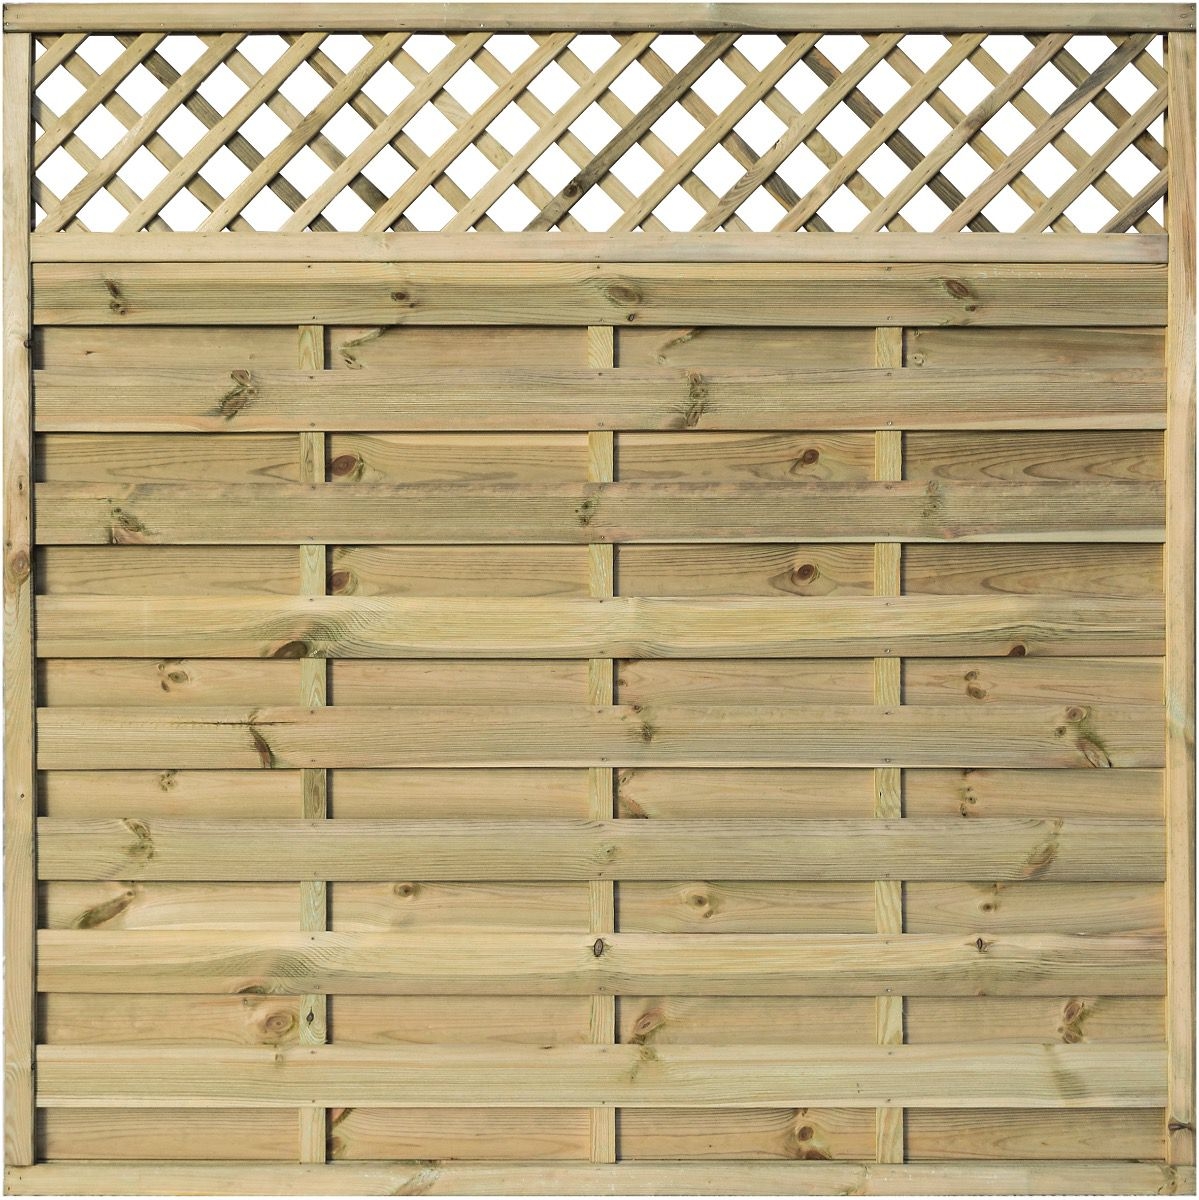 The Barnsbury screen Fence Panel with Lattice Top